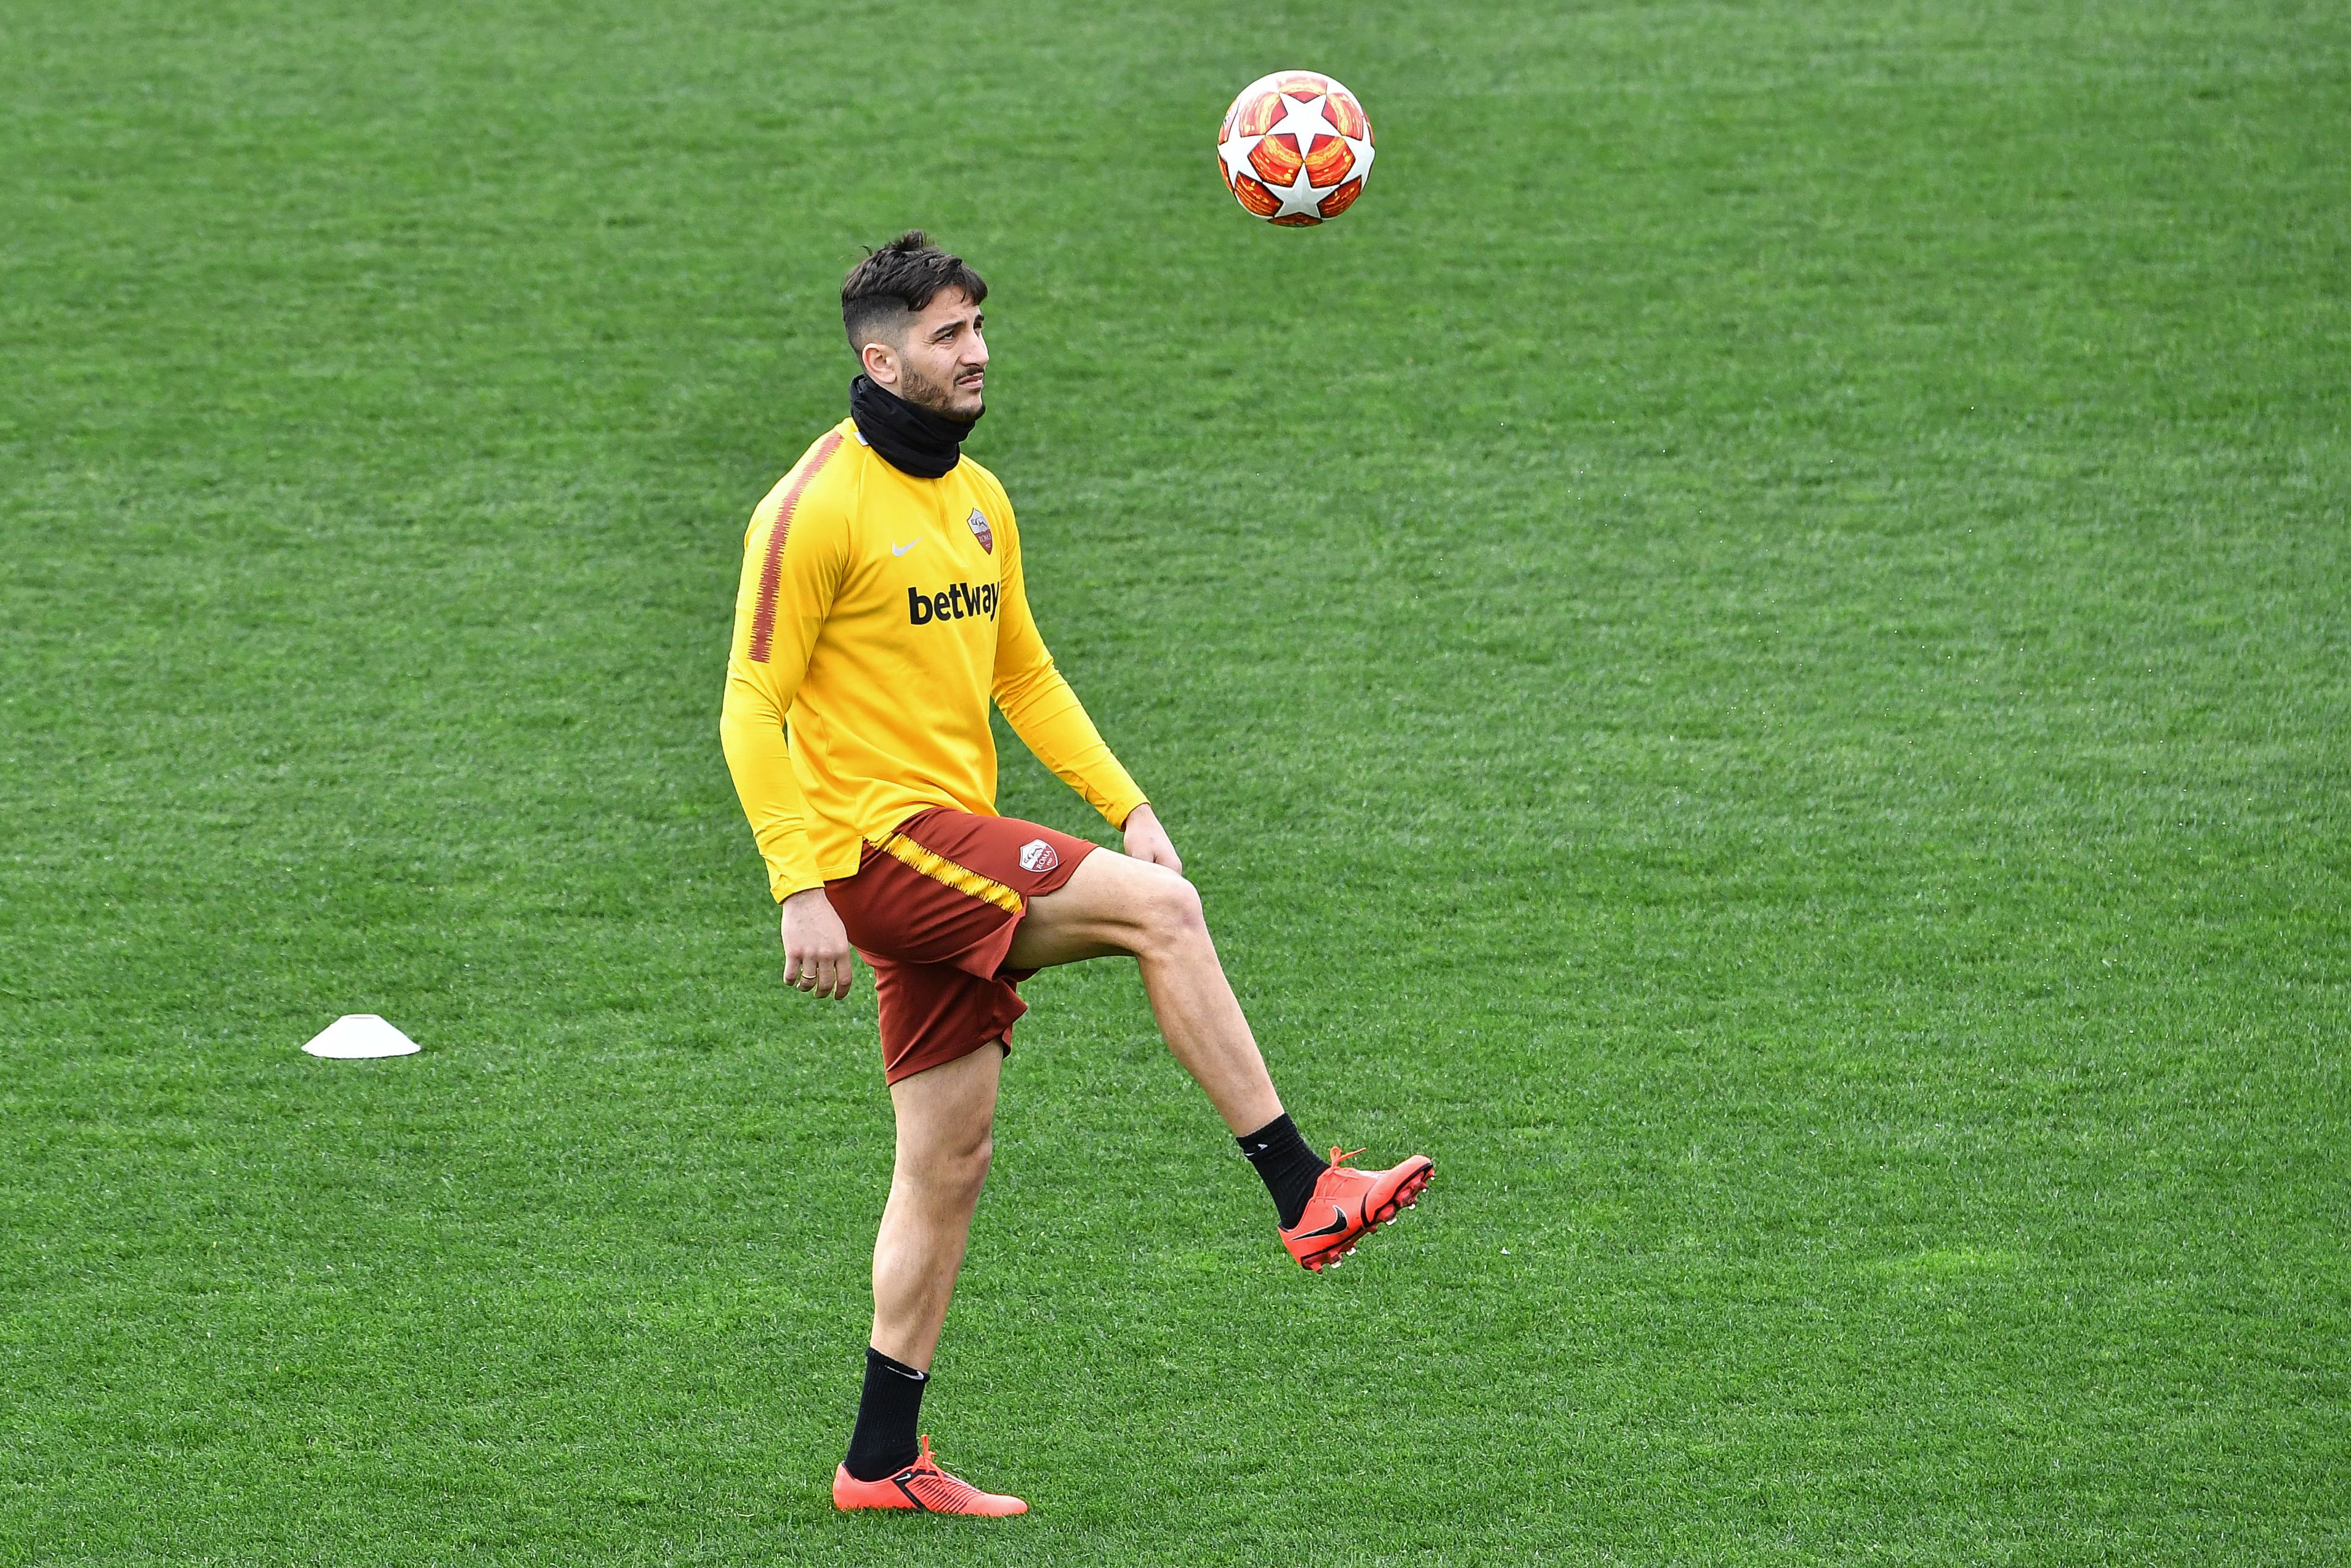 AS Roma's Greek defender Konstantinos Manolas juggles with a ball during a training session at AS Roma's training ground in Trigoria, south of Rome on March 5, 2019, on the eve of their UEFA Champions League round of 16 second leg football match FC Porto vs AS Roma. (Photo by Andreas SOLARO / AFP)        (Photo credit should read ANDREAS SOLARO/AFP/Getty Images)